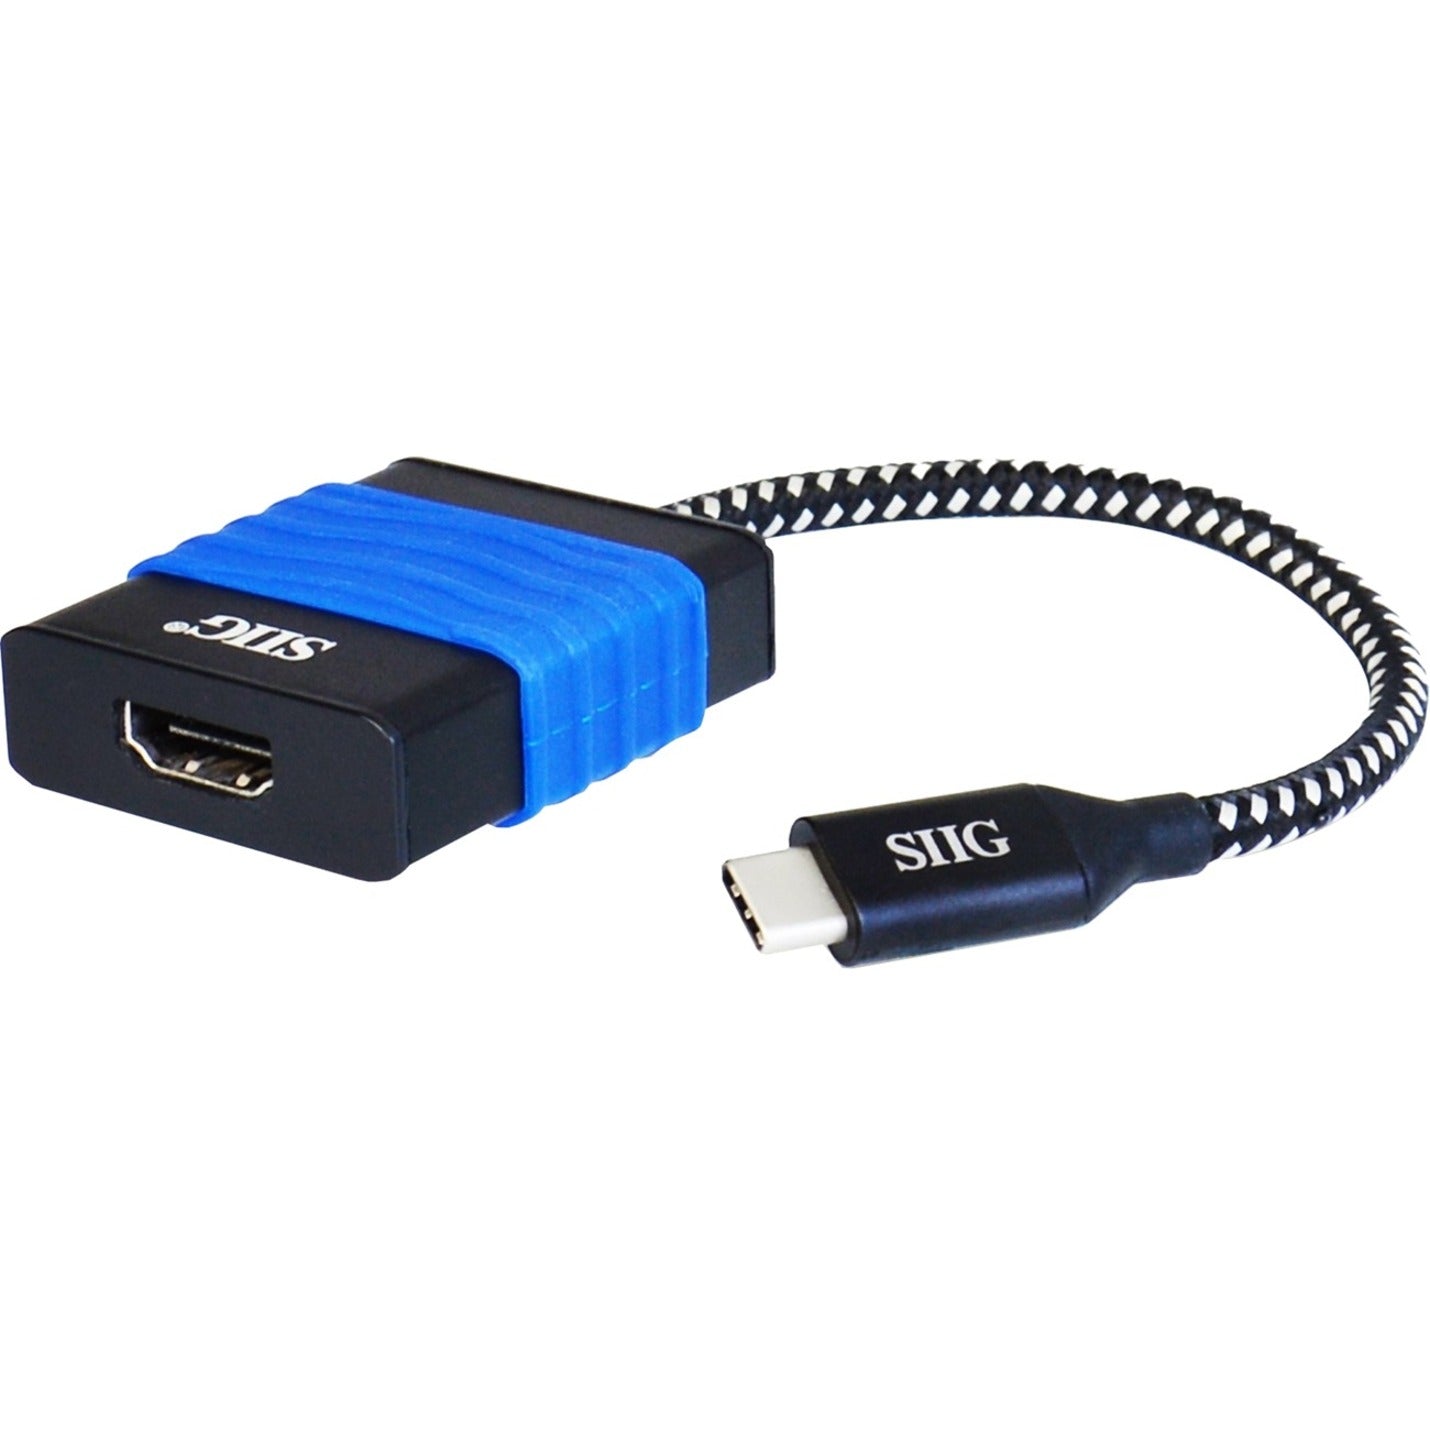 SIIG CB-TC0014-S2 USB Type-C to HDMI Cable Adapter - 4Kx2K, Connect Your PC to a 4K Display